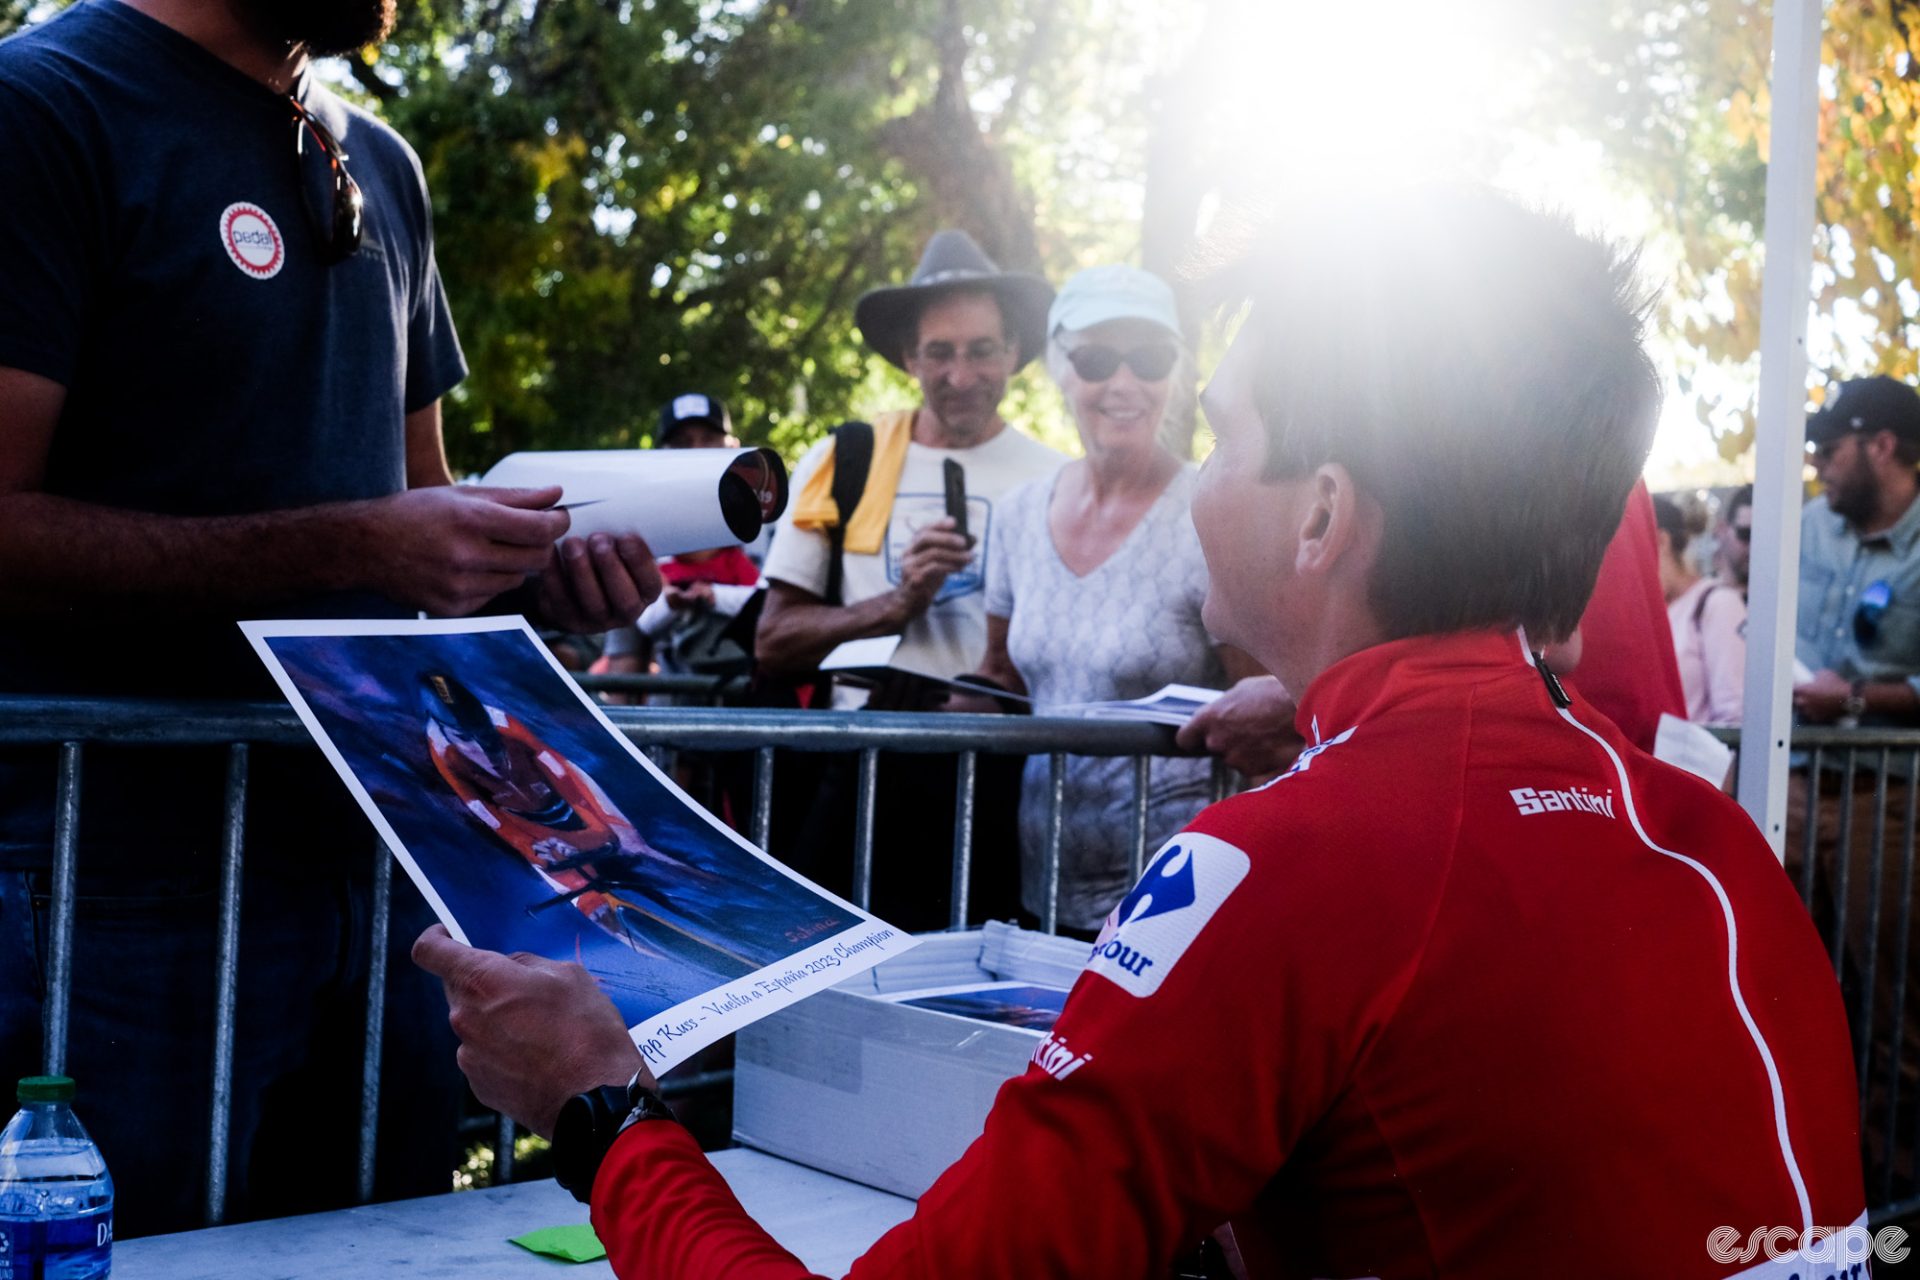 Kuss, in his red jersey, is sitting at a folding table and hands a signed poster to an autograph seeker. More fans wait behind for their turn.